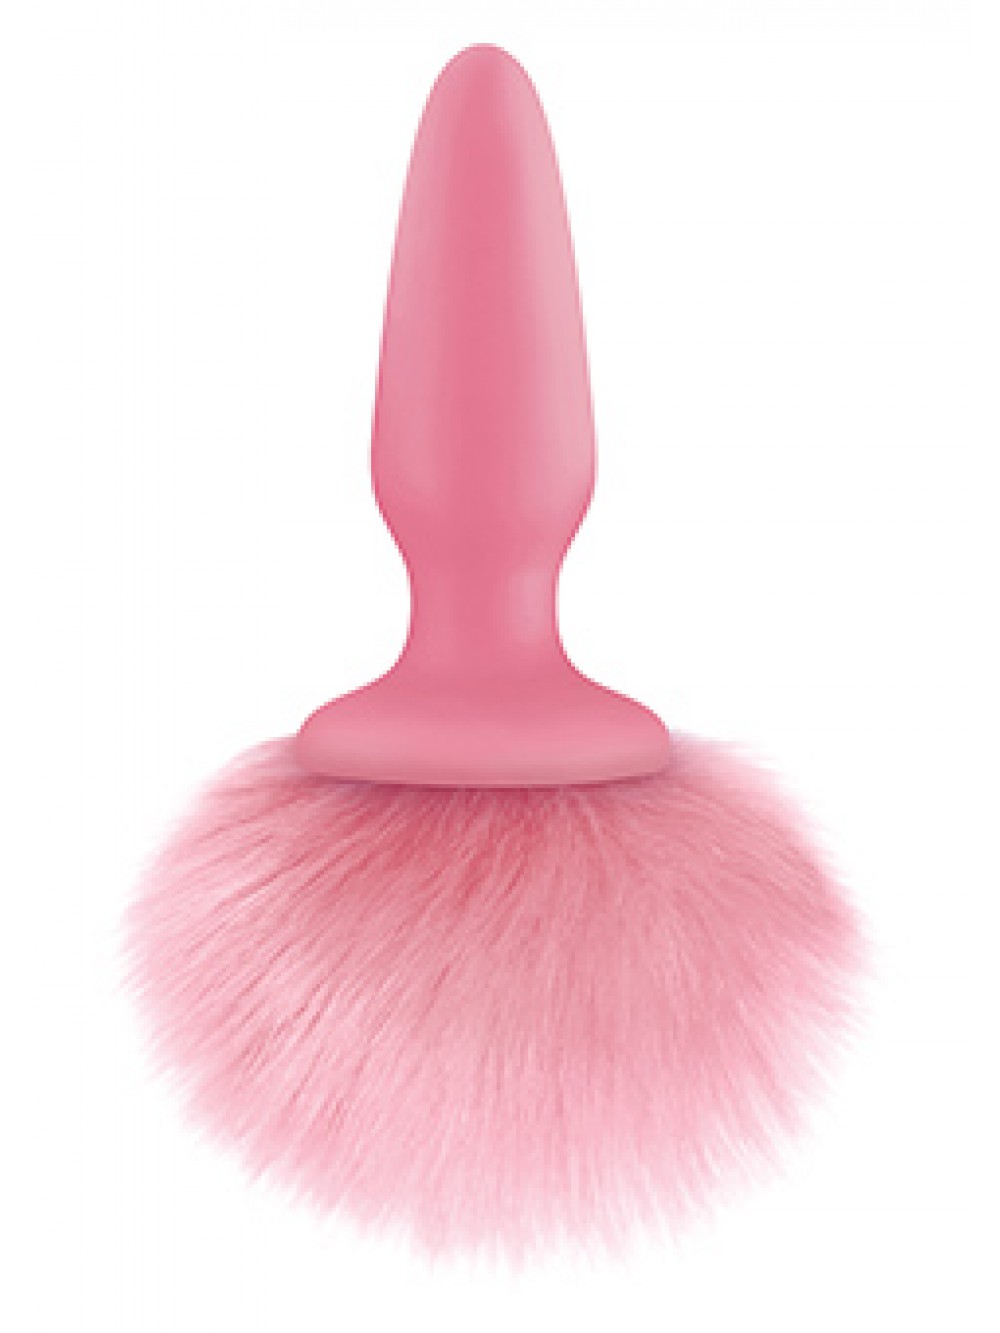 BUNNY TAILS PINK 0657447098192